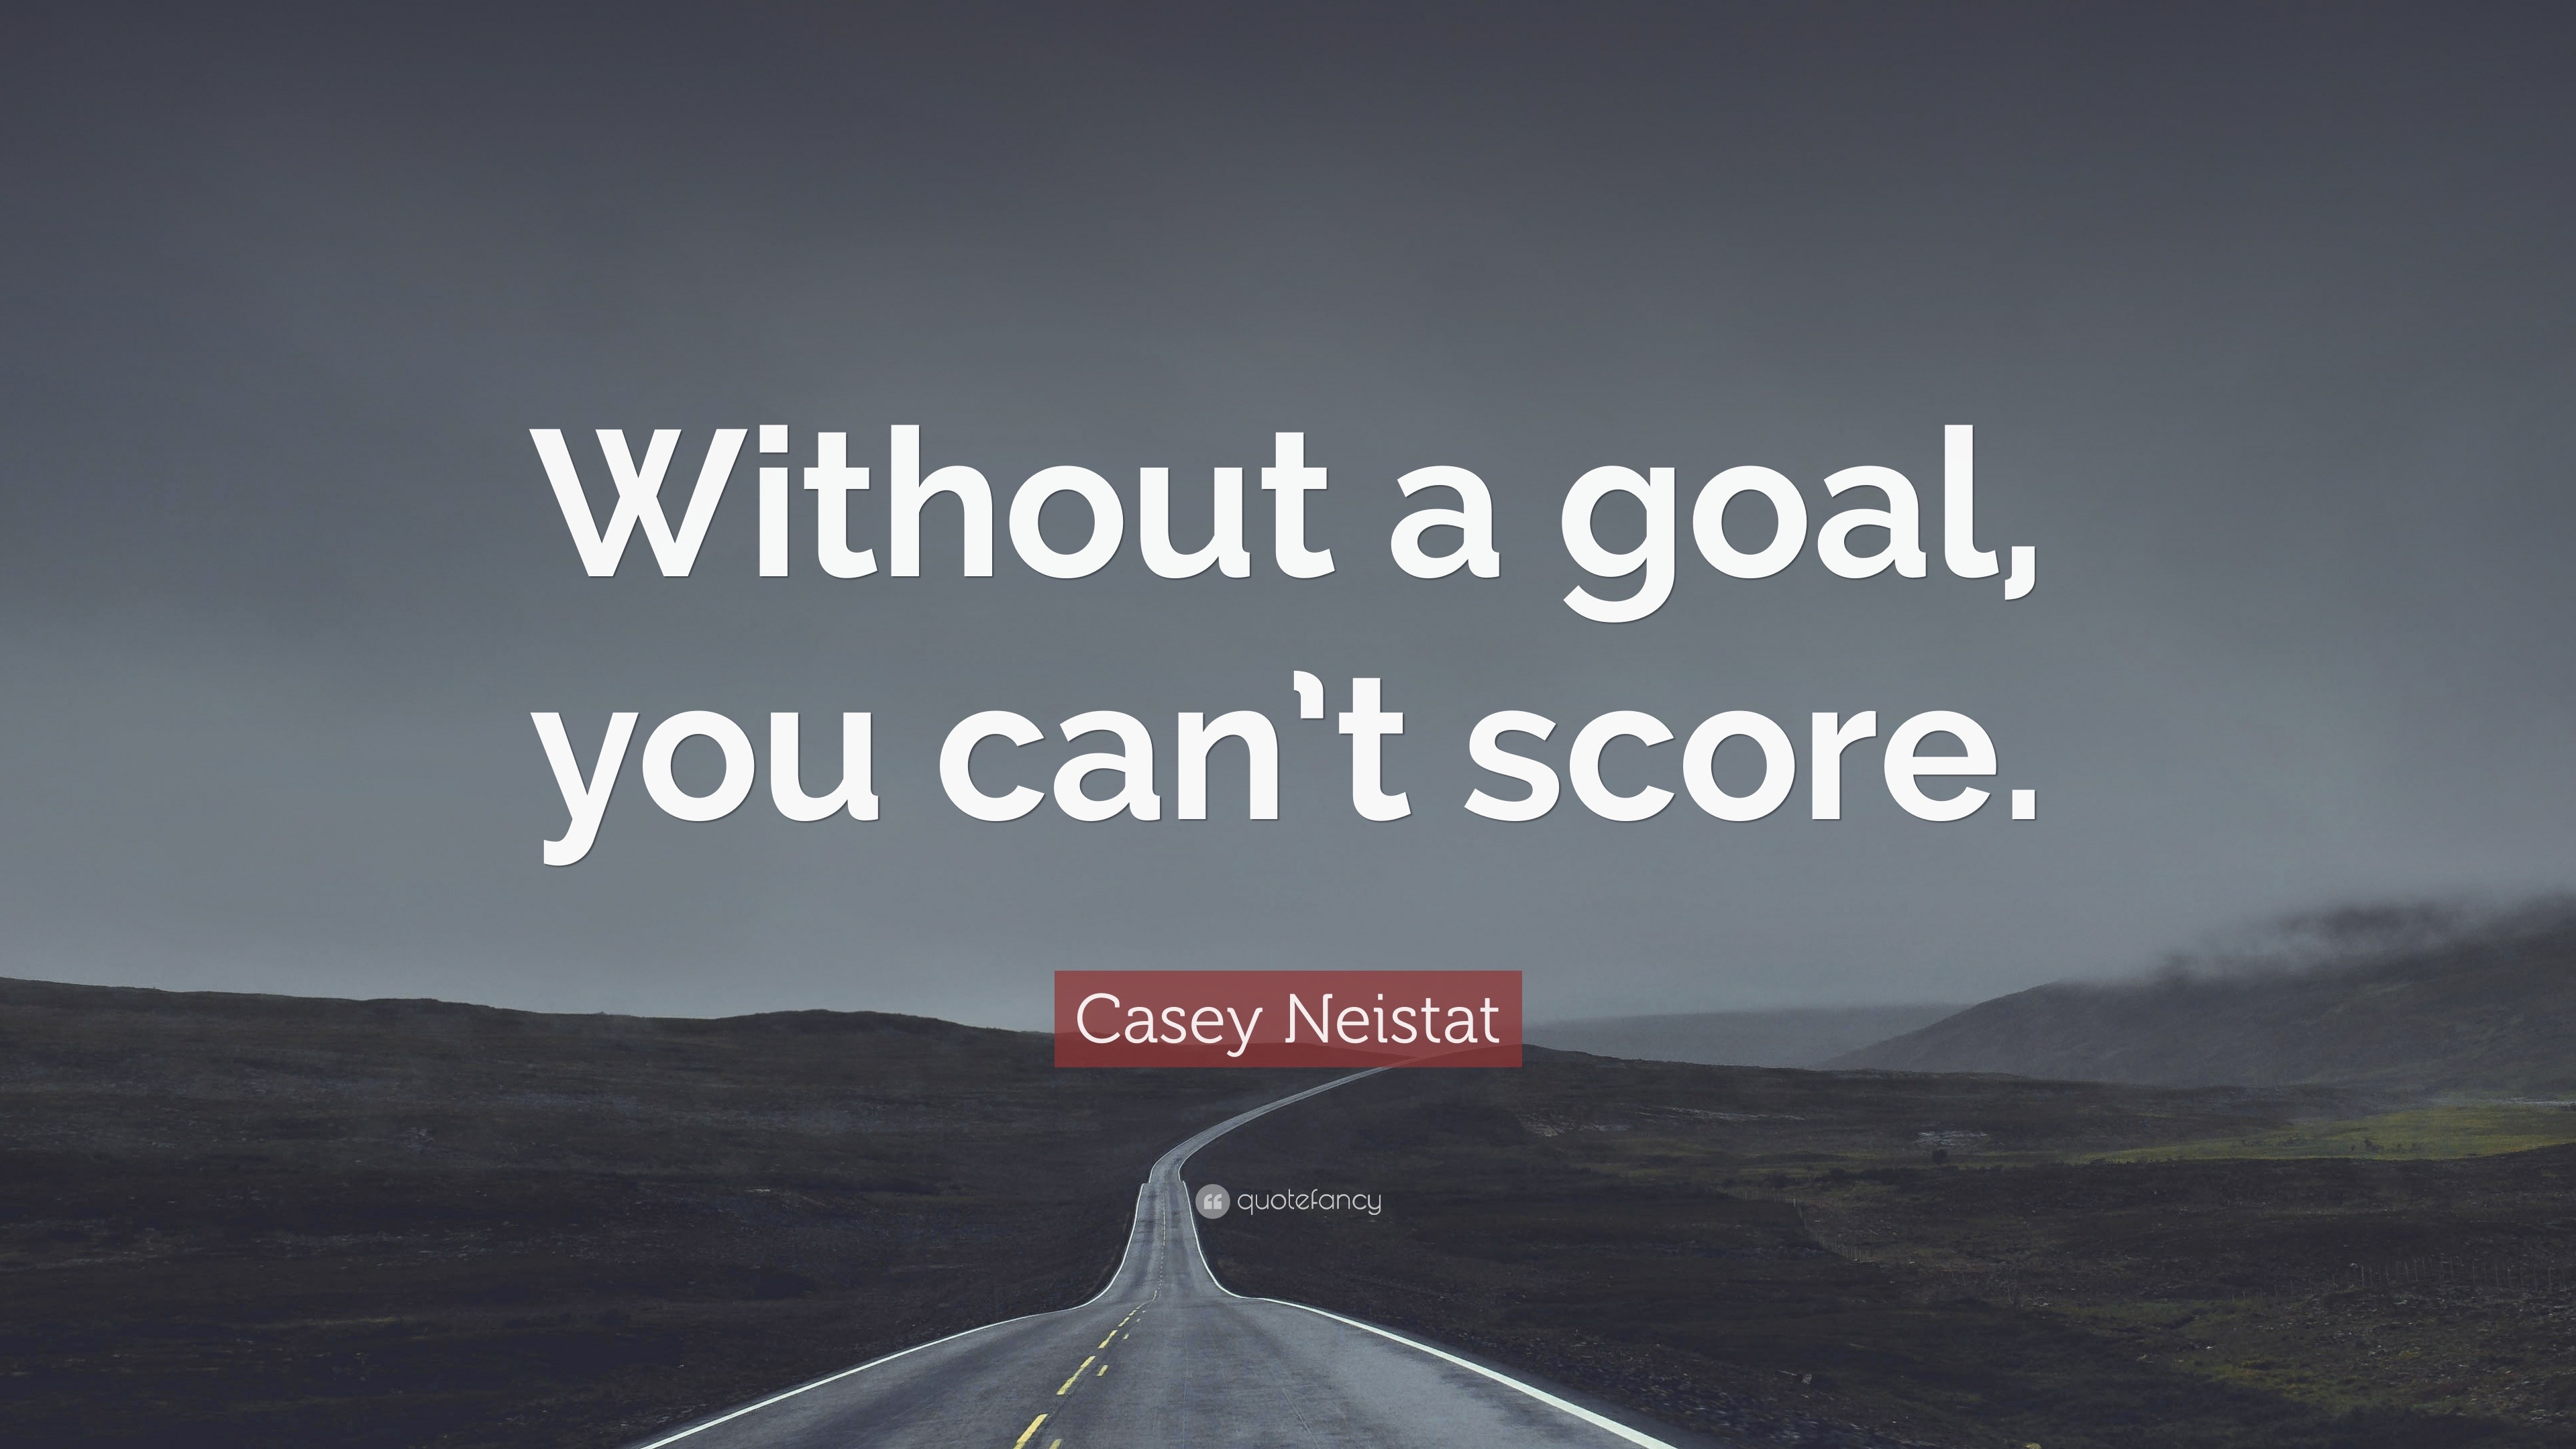 Casey Neistat Quote: "Without a goal, you can’t score. 